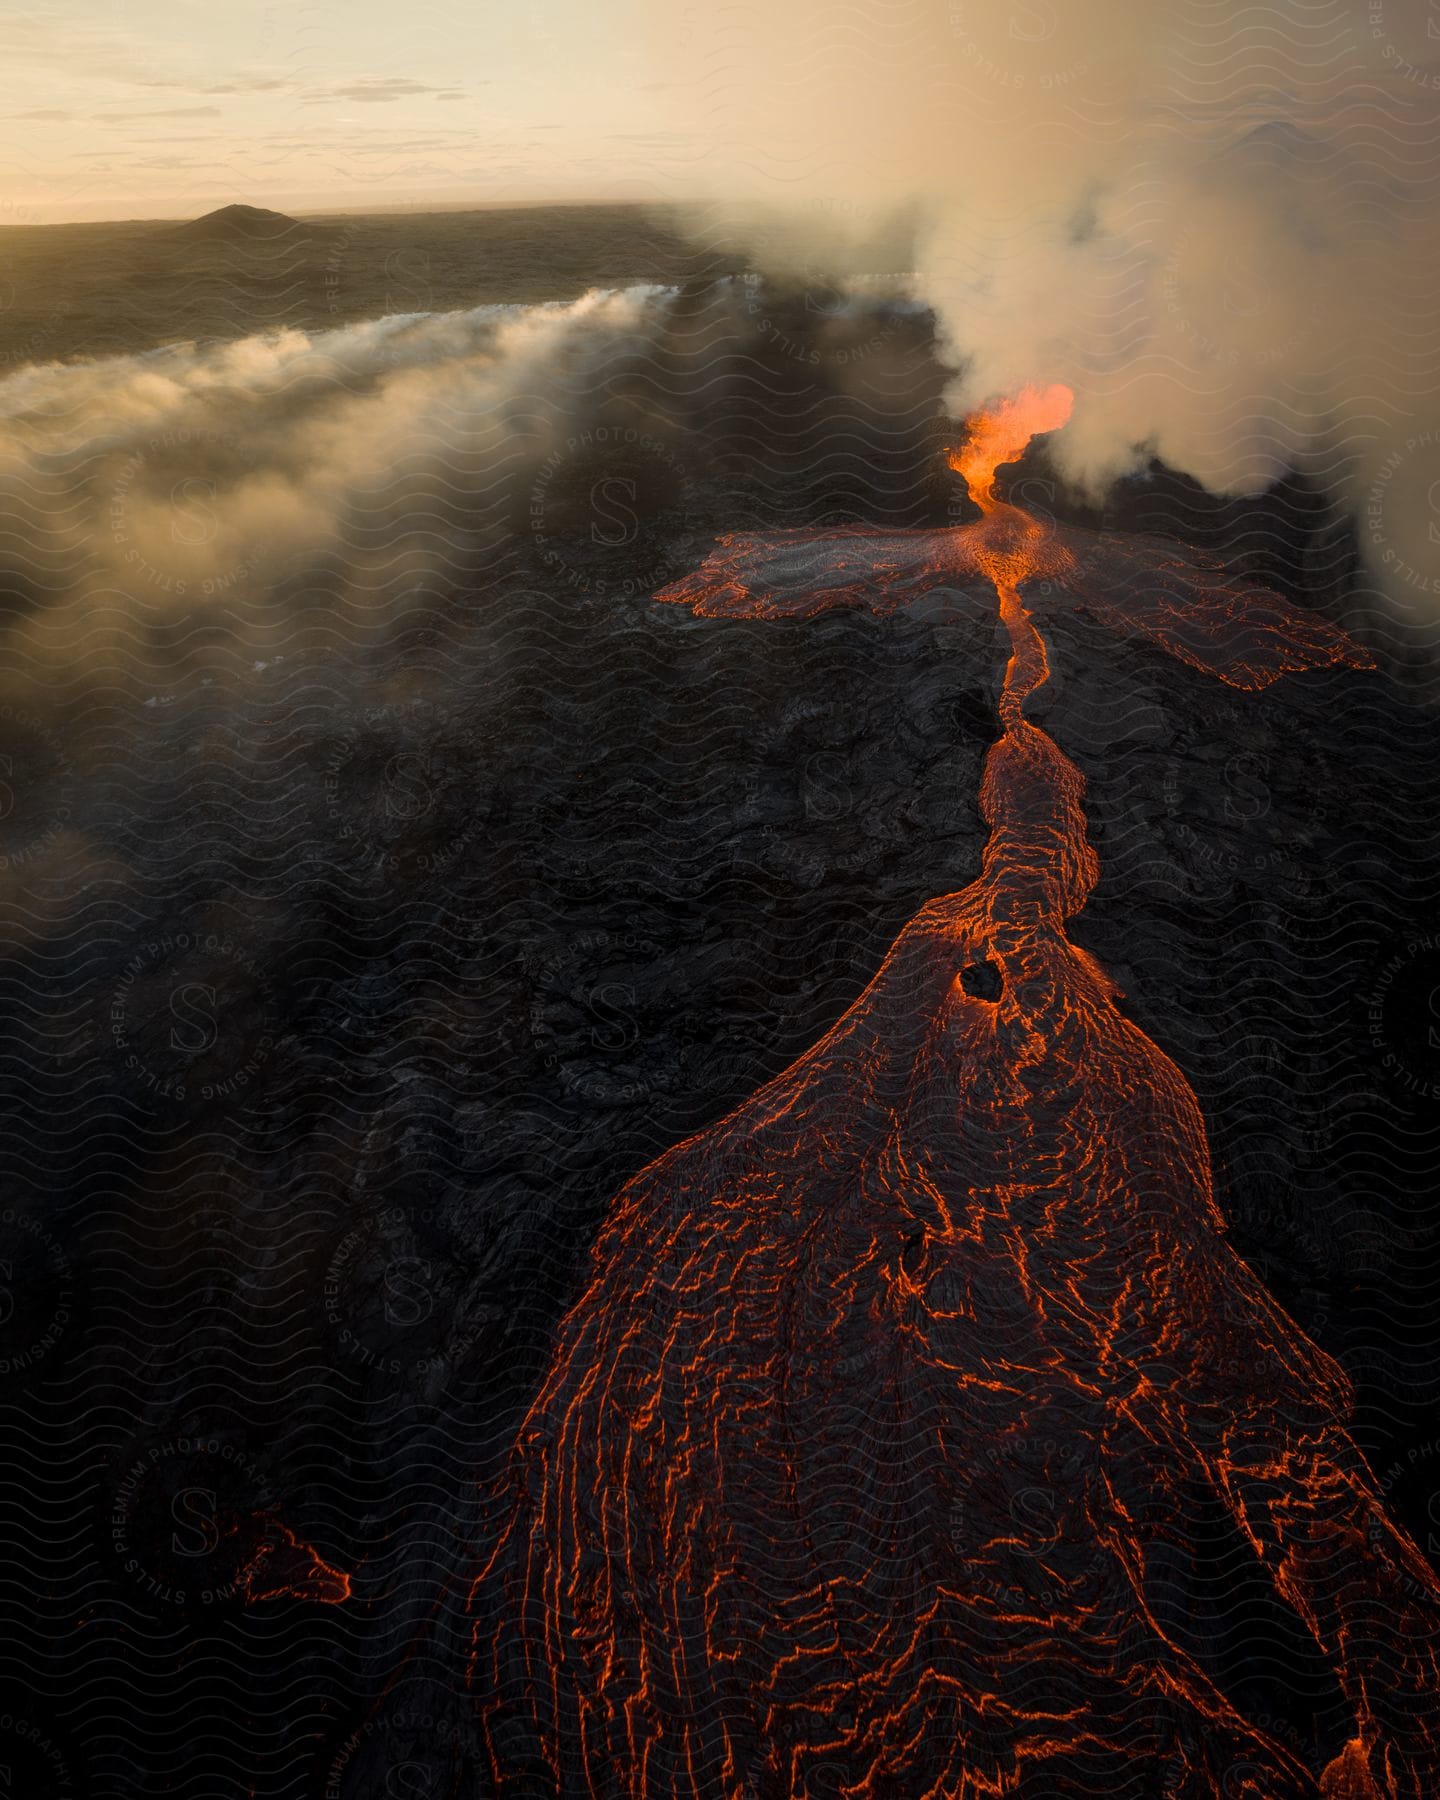 Path of lava, magma, and smoke from a volcano.